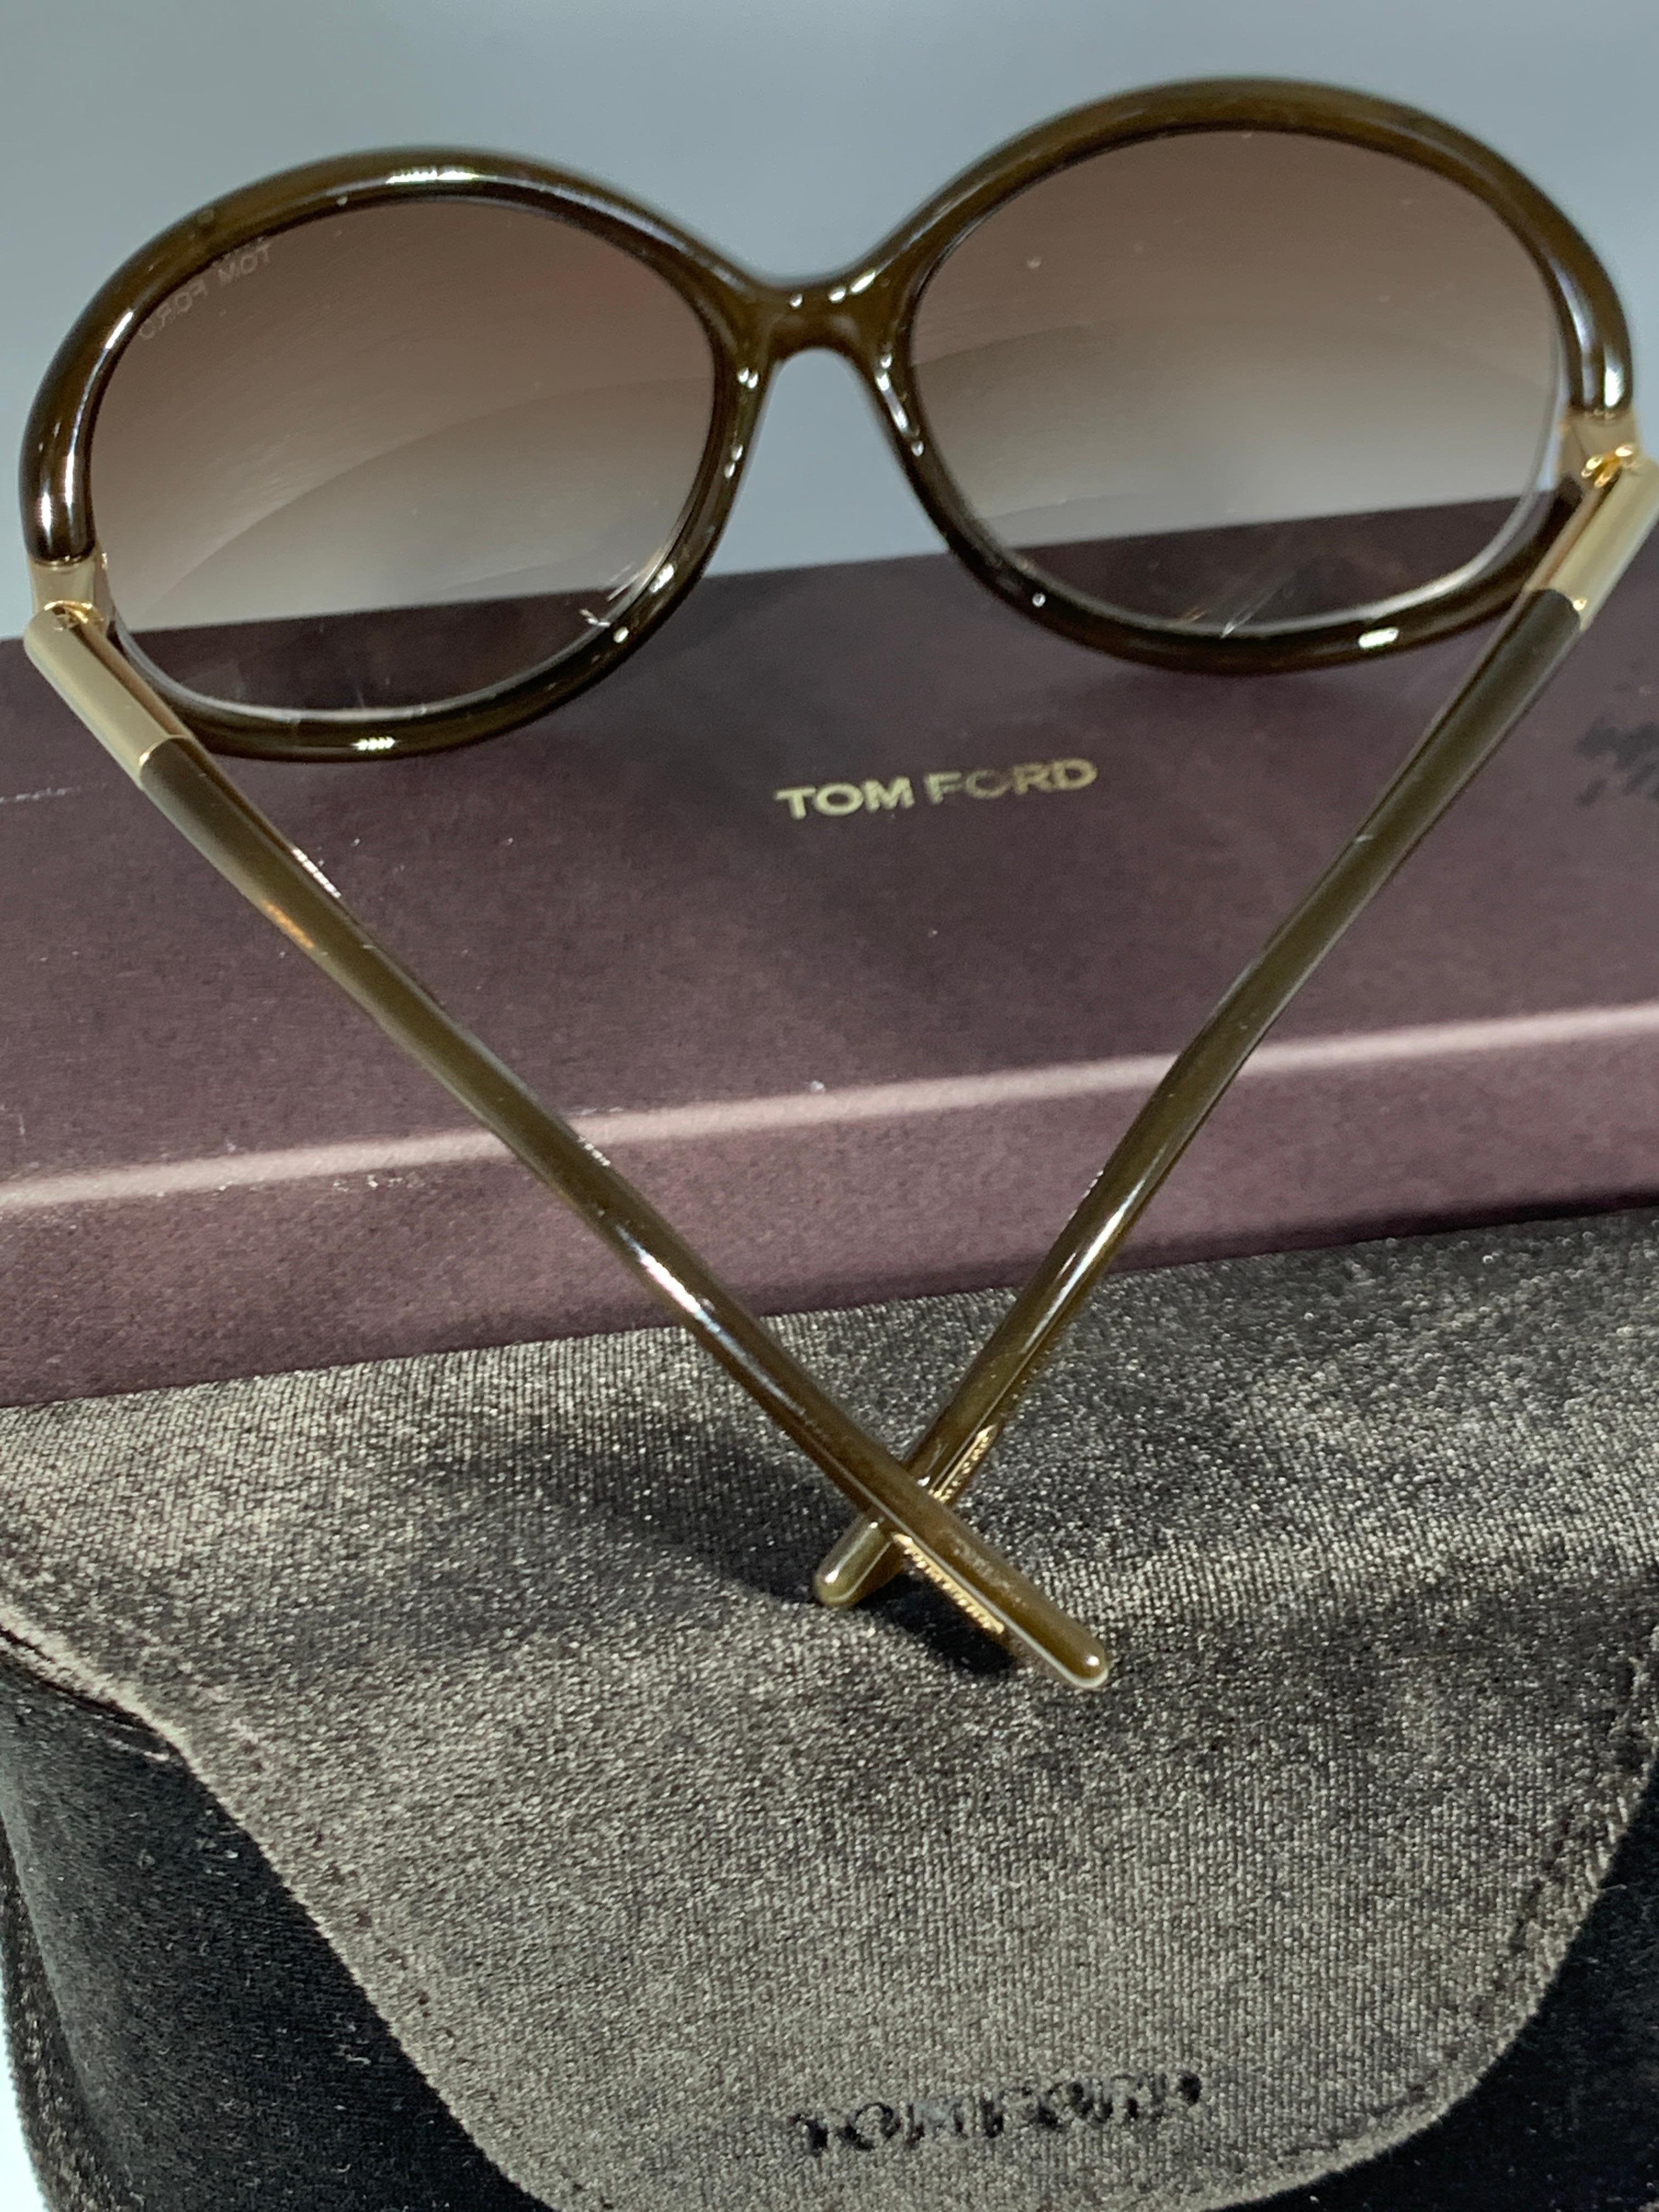 tom ford made in italy